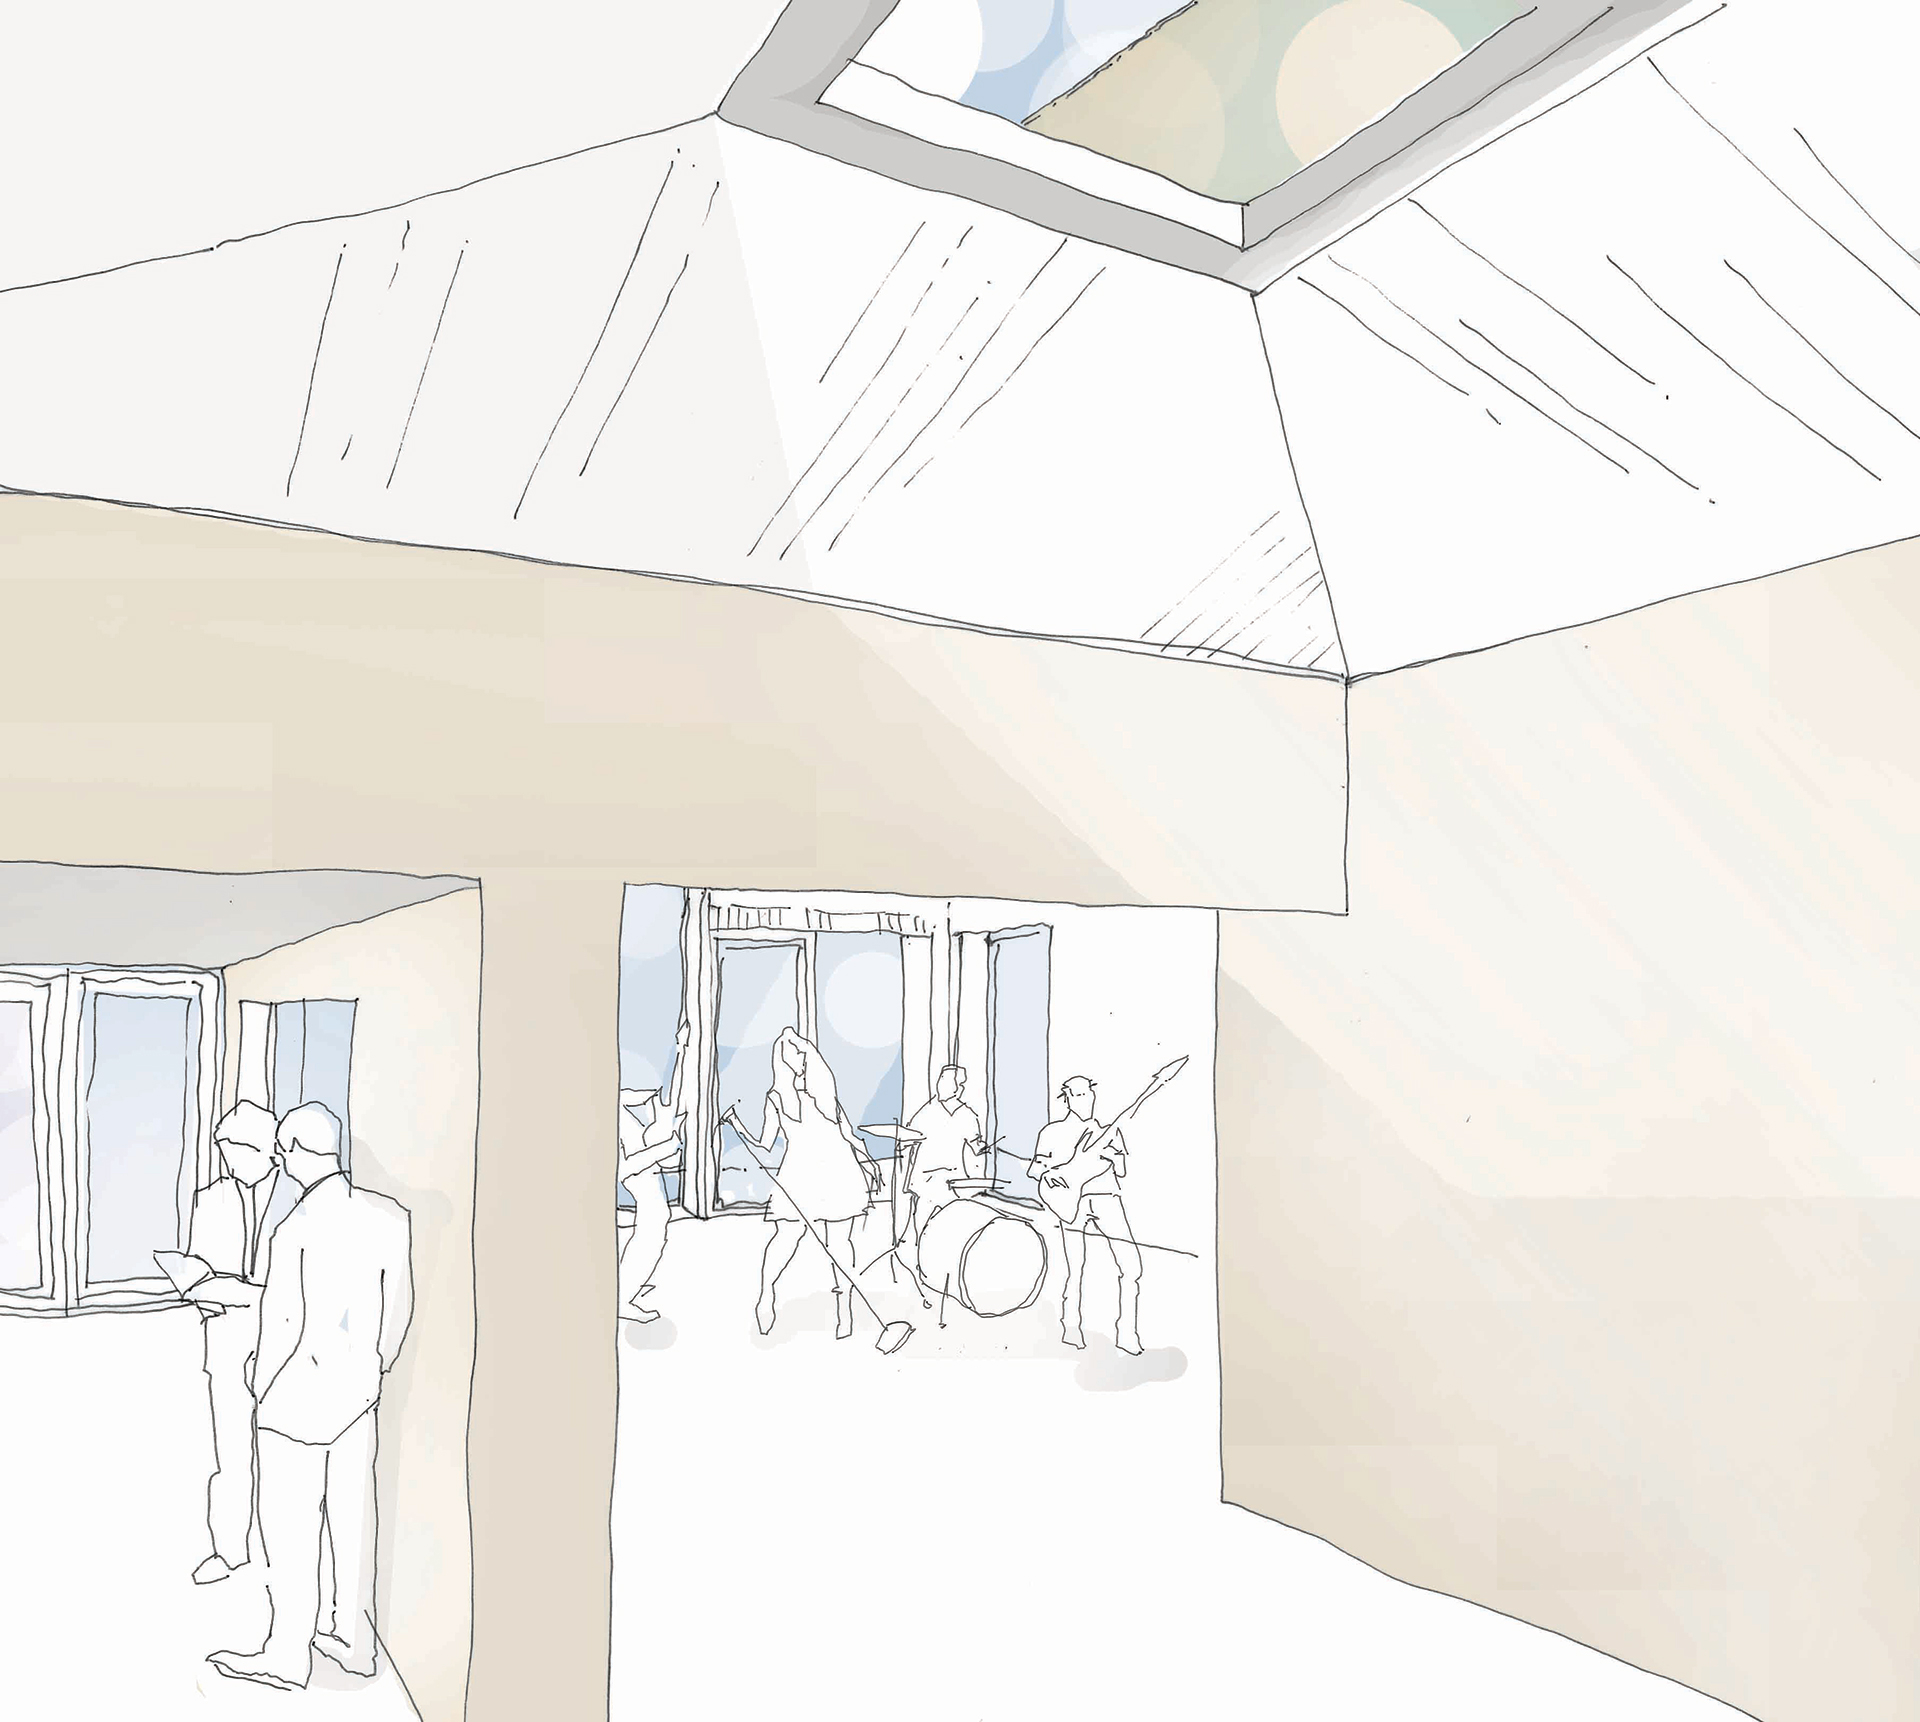 sketch of internal atrium with window in ceiling